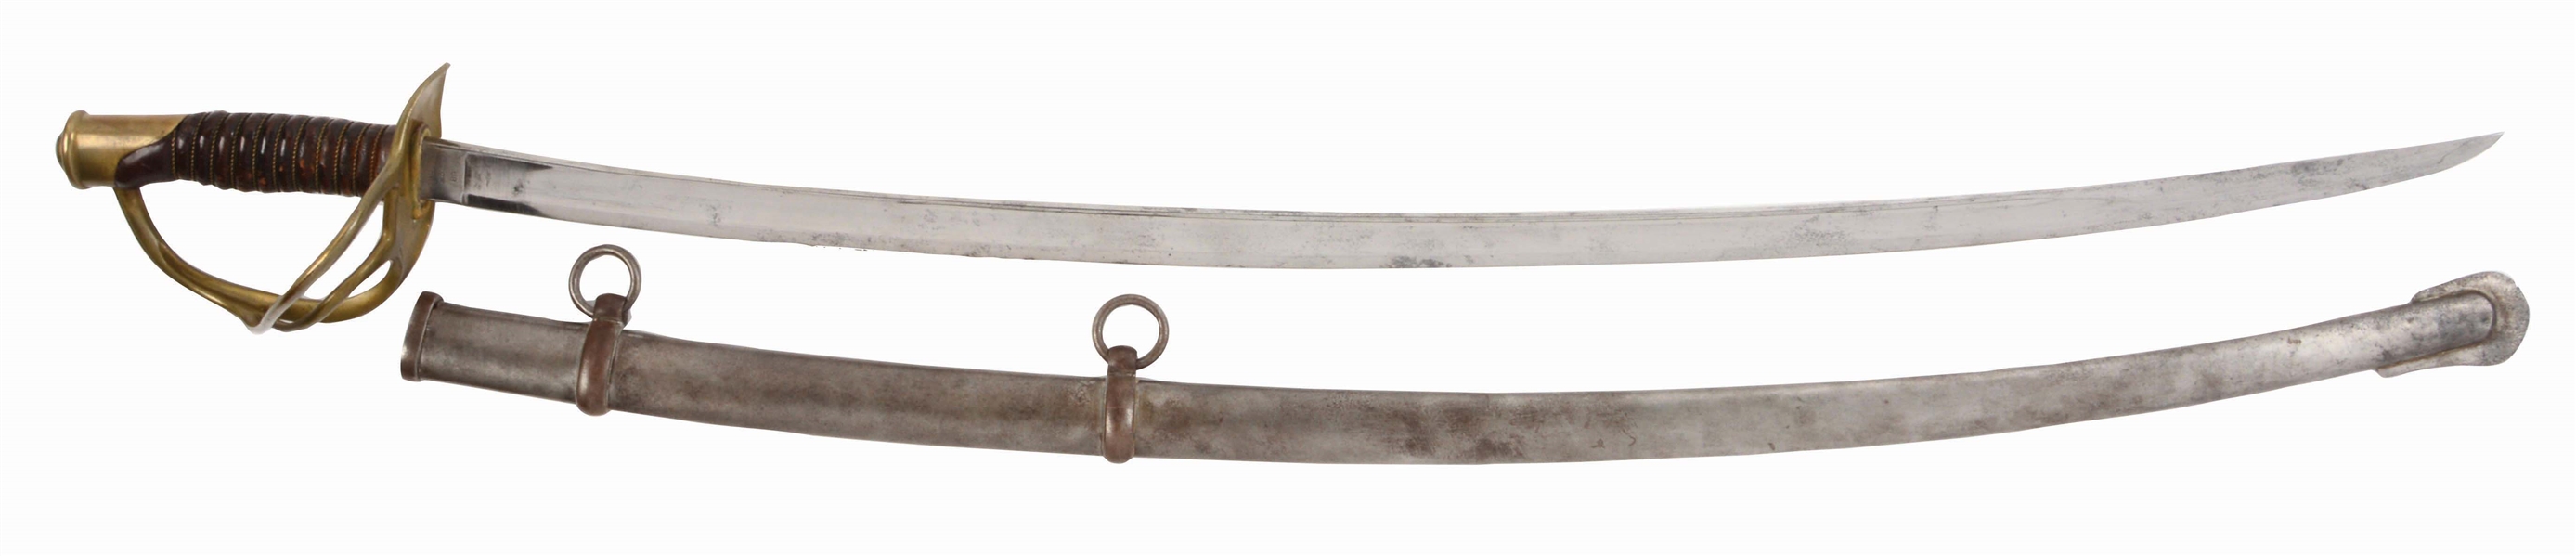 AMES 1861 MANUFACTURED 1860 CAVALRY SABER.